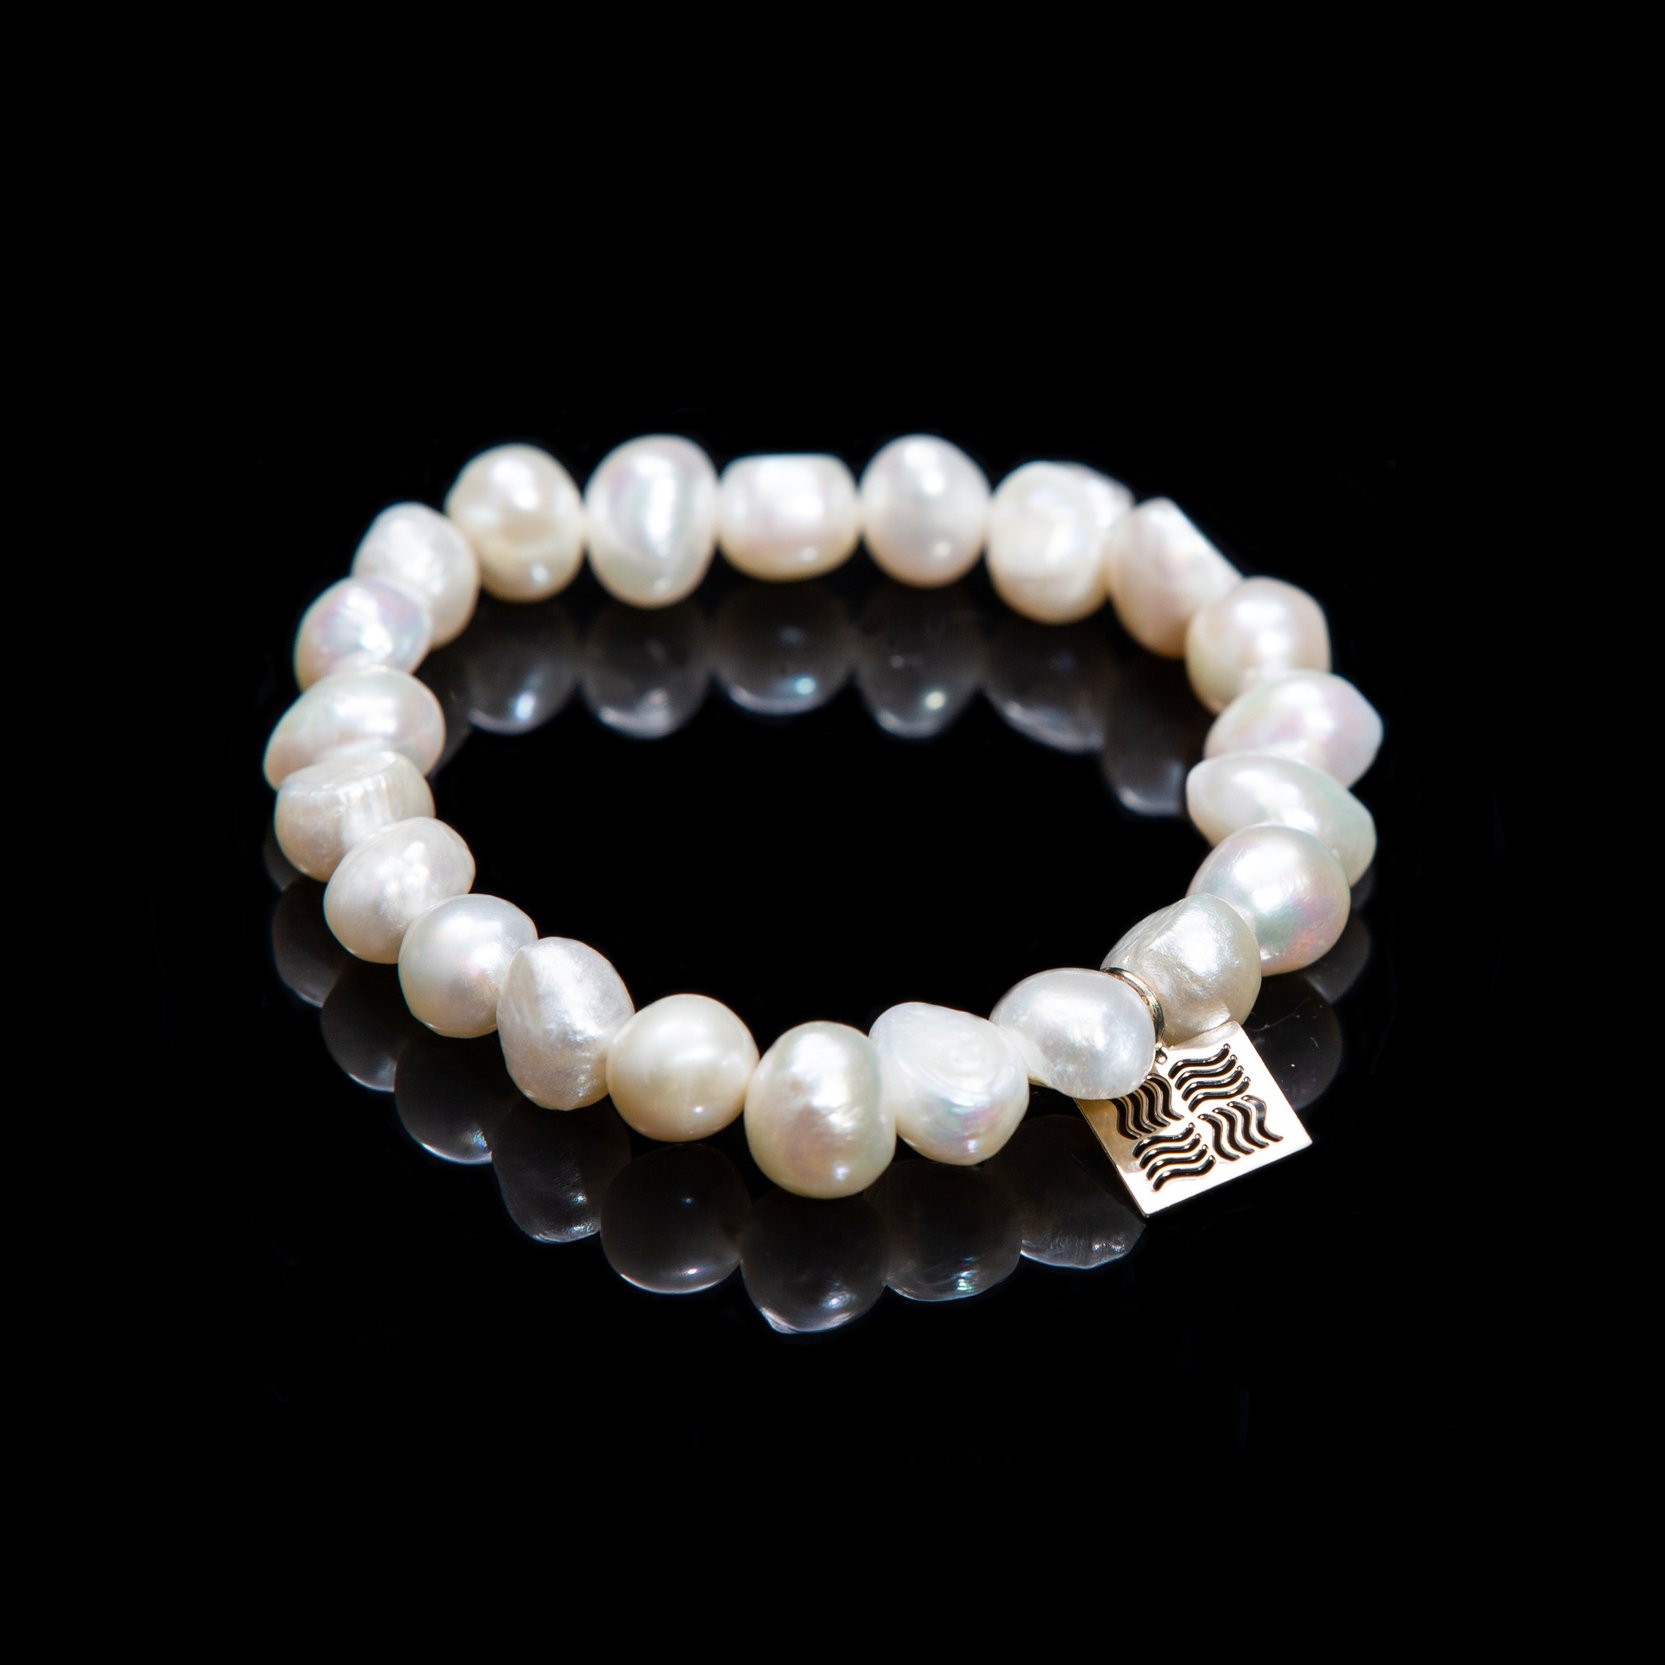 Pearl bracelet with silver-plated pendant